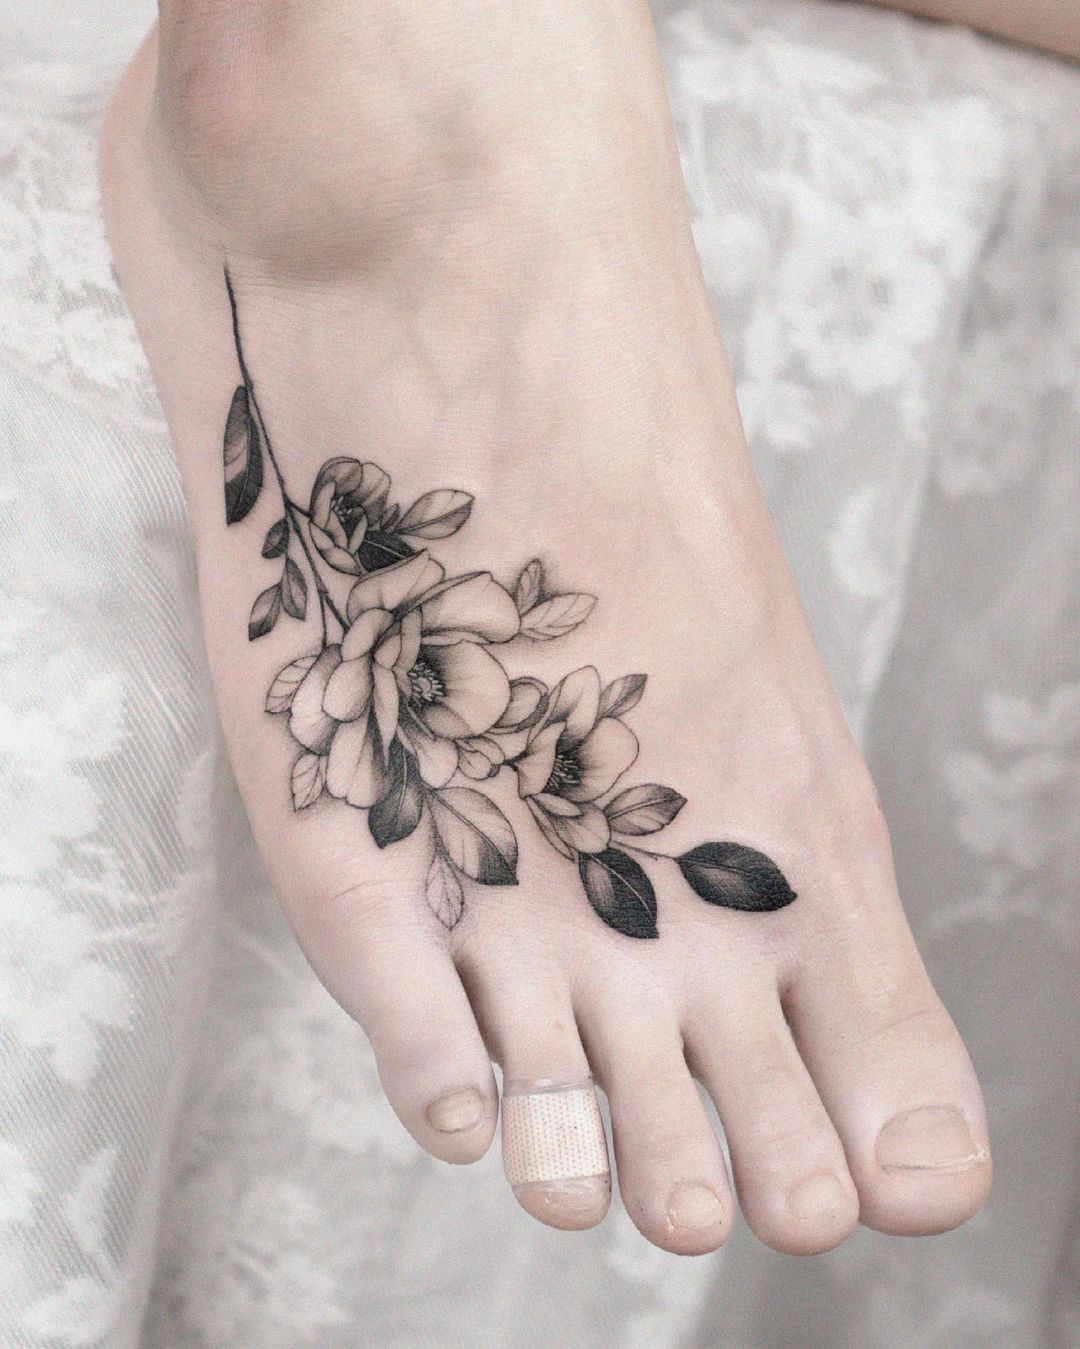 15+ Super Cool Tattoos For Women images 13